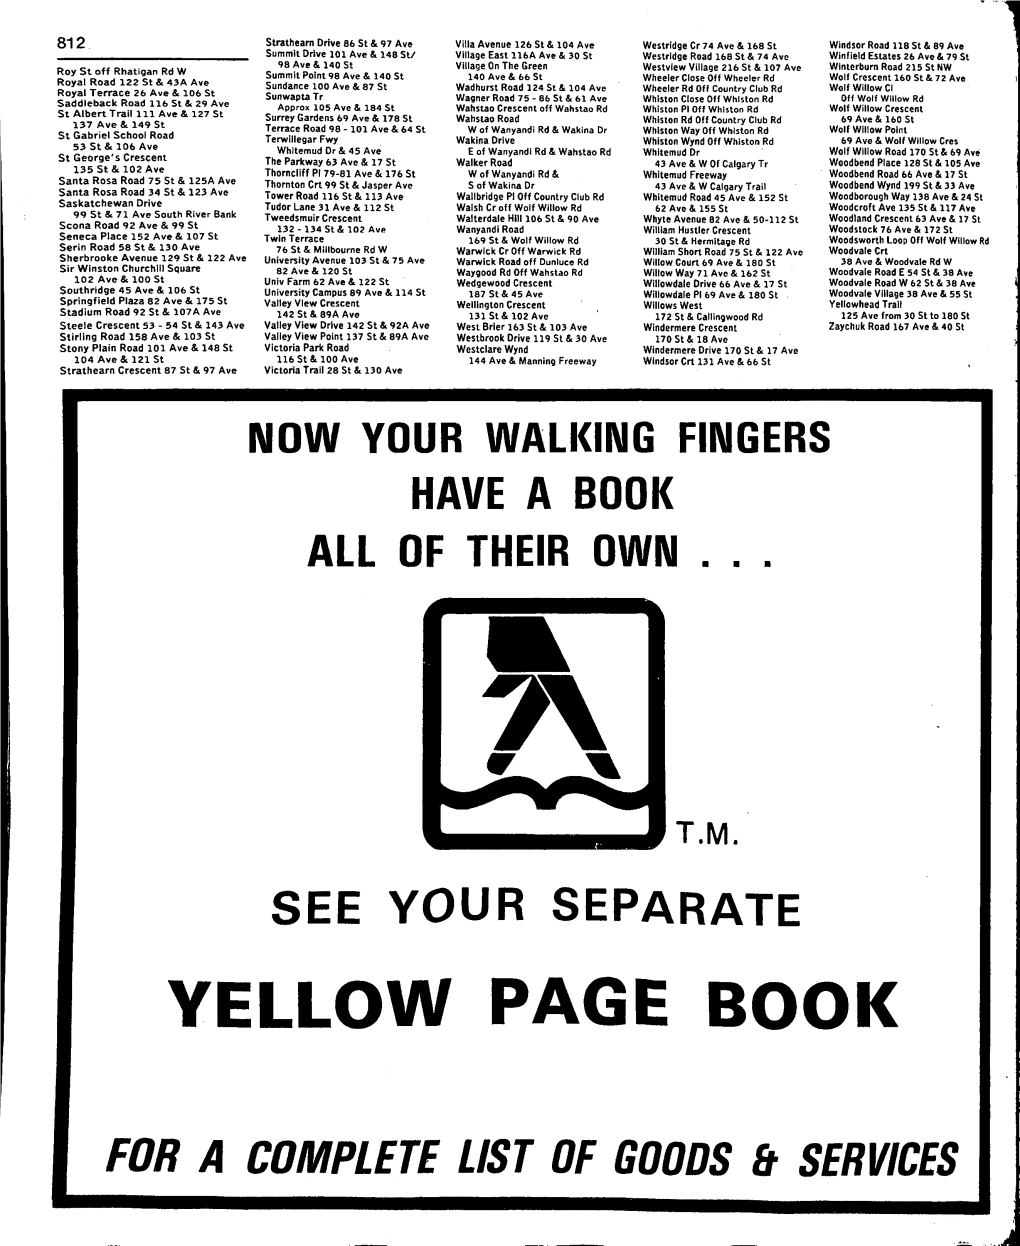 Yellow Page Book